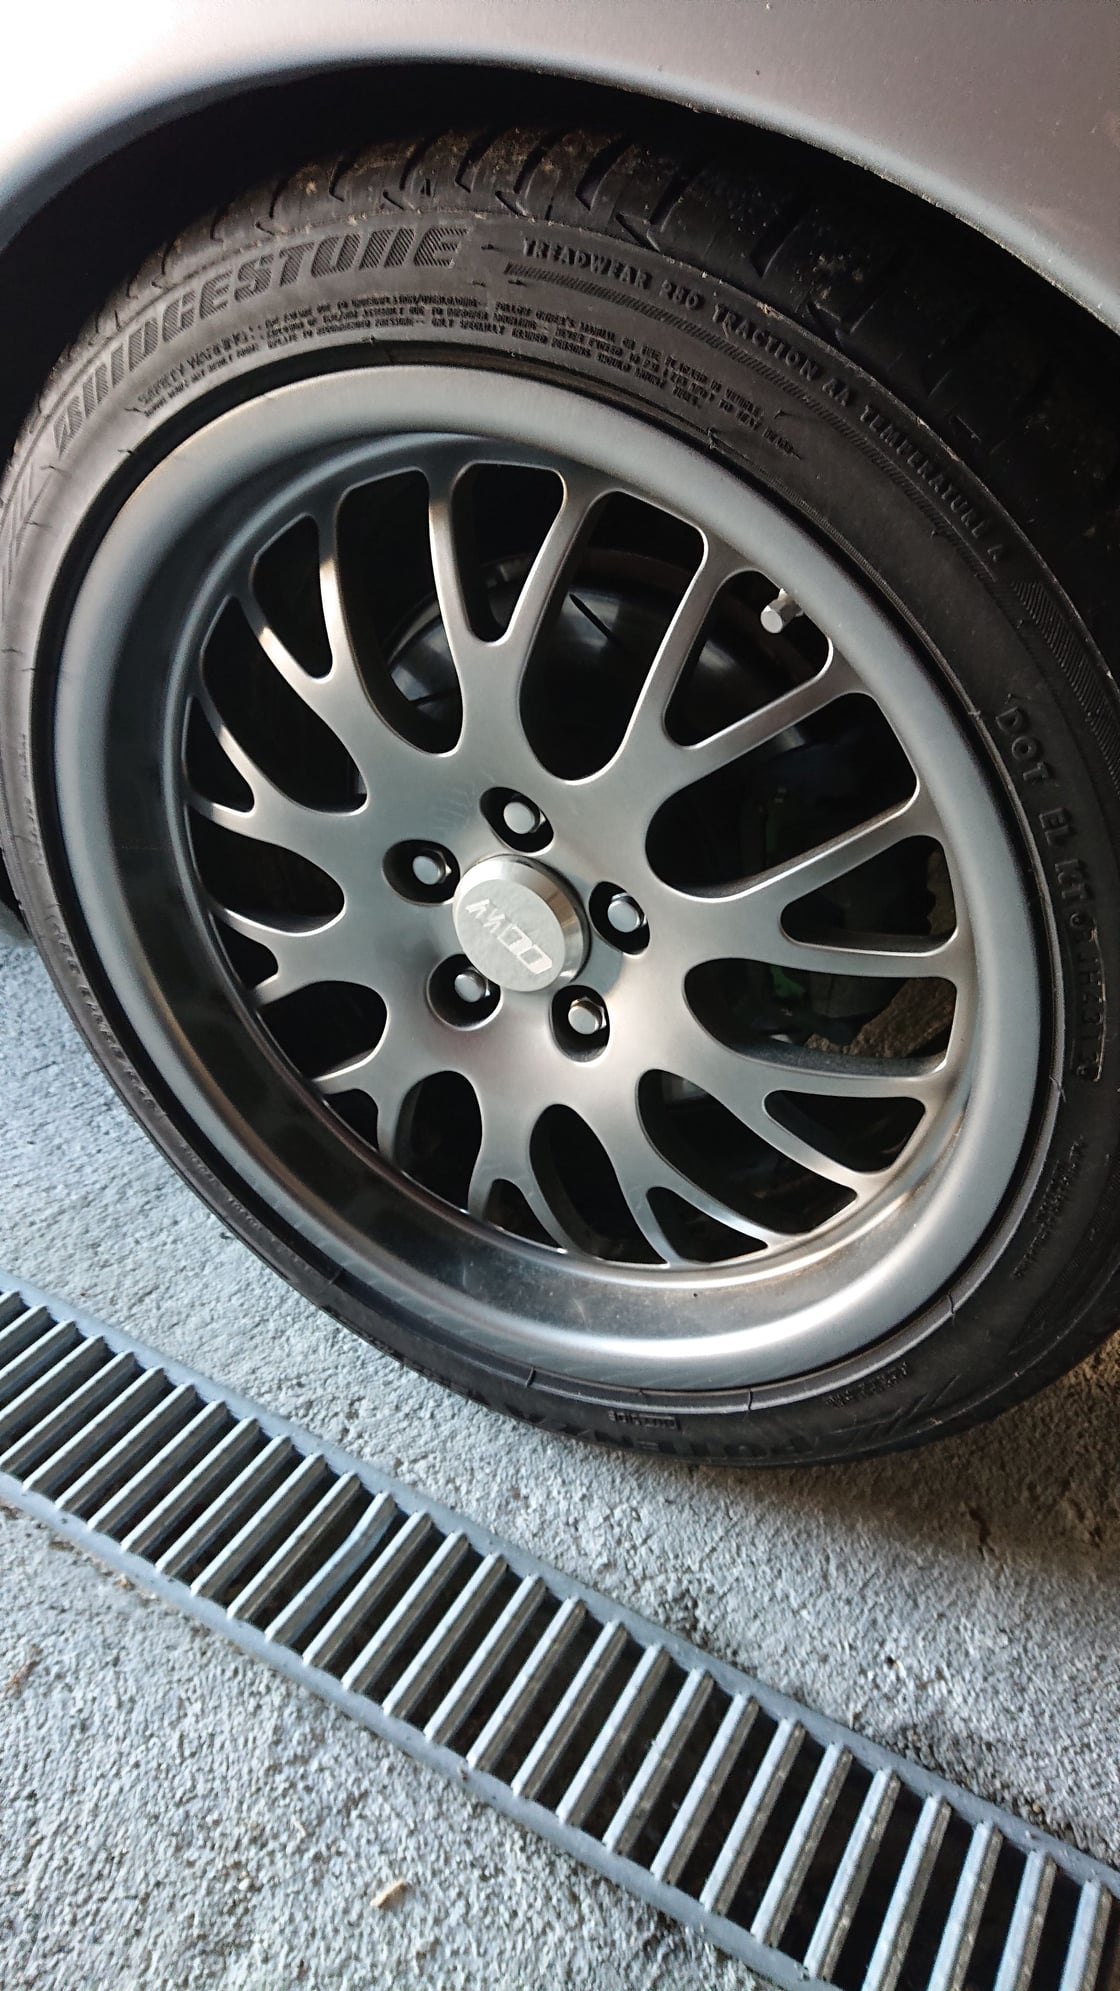 Wheels and Tires/Axles - CCW SP20 18x9,5 & 18x10 "FD fitment" - Used - 0  All Models - Bergen, Norway